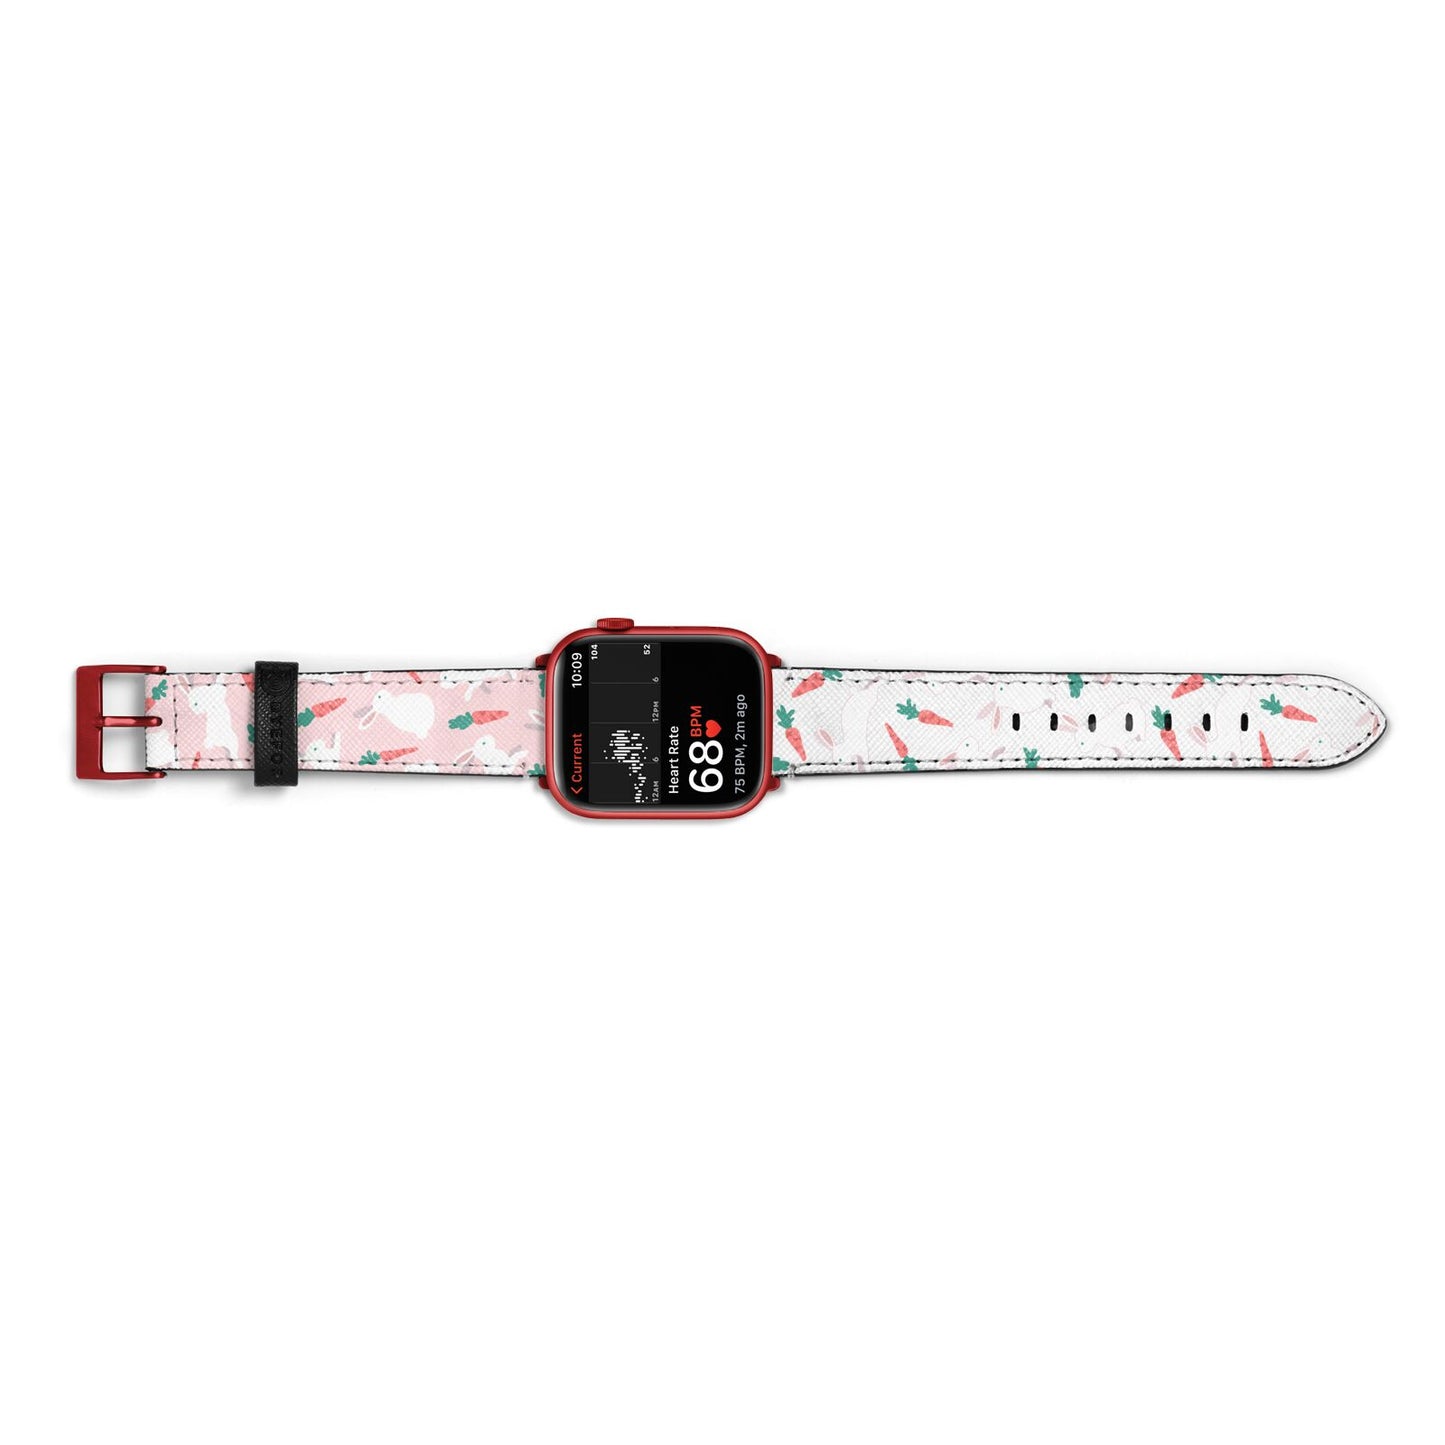 Easter Bunny And Carrot Apple Watch Strap Size 38mm Landscape Image Red Hardware